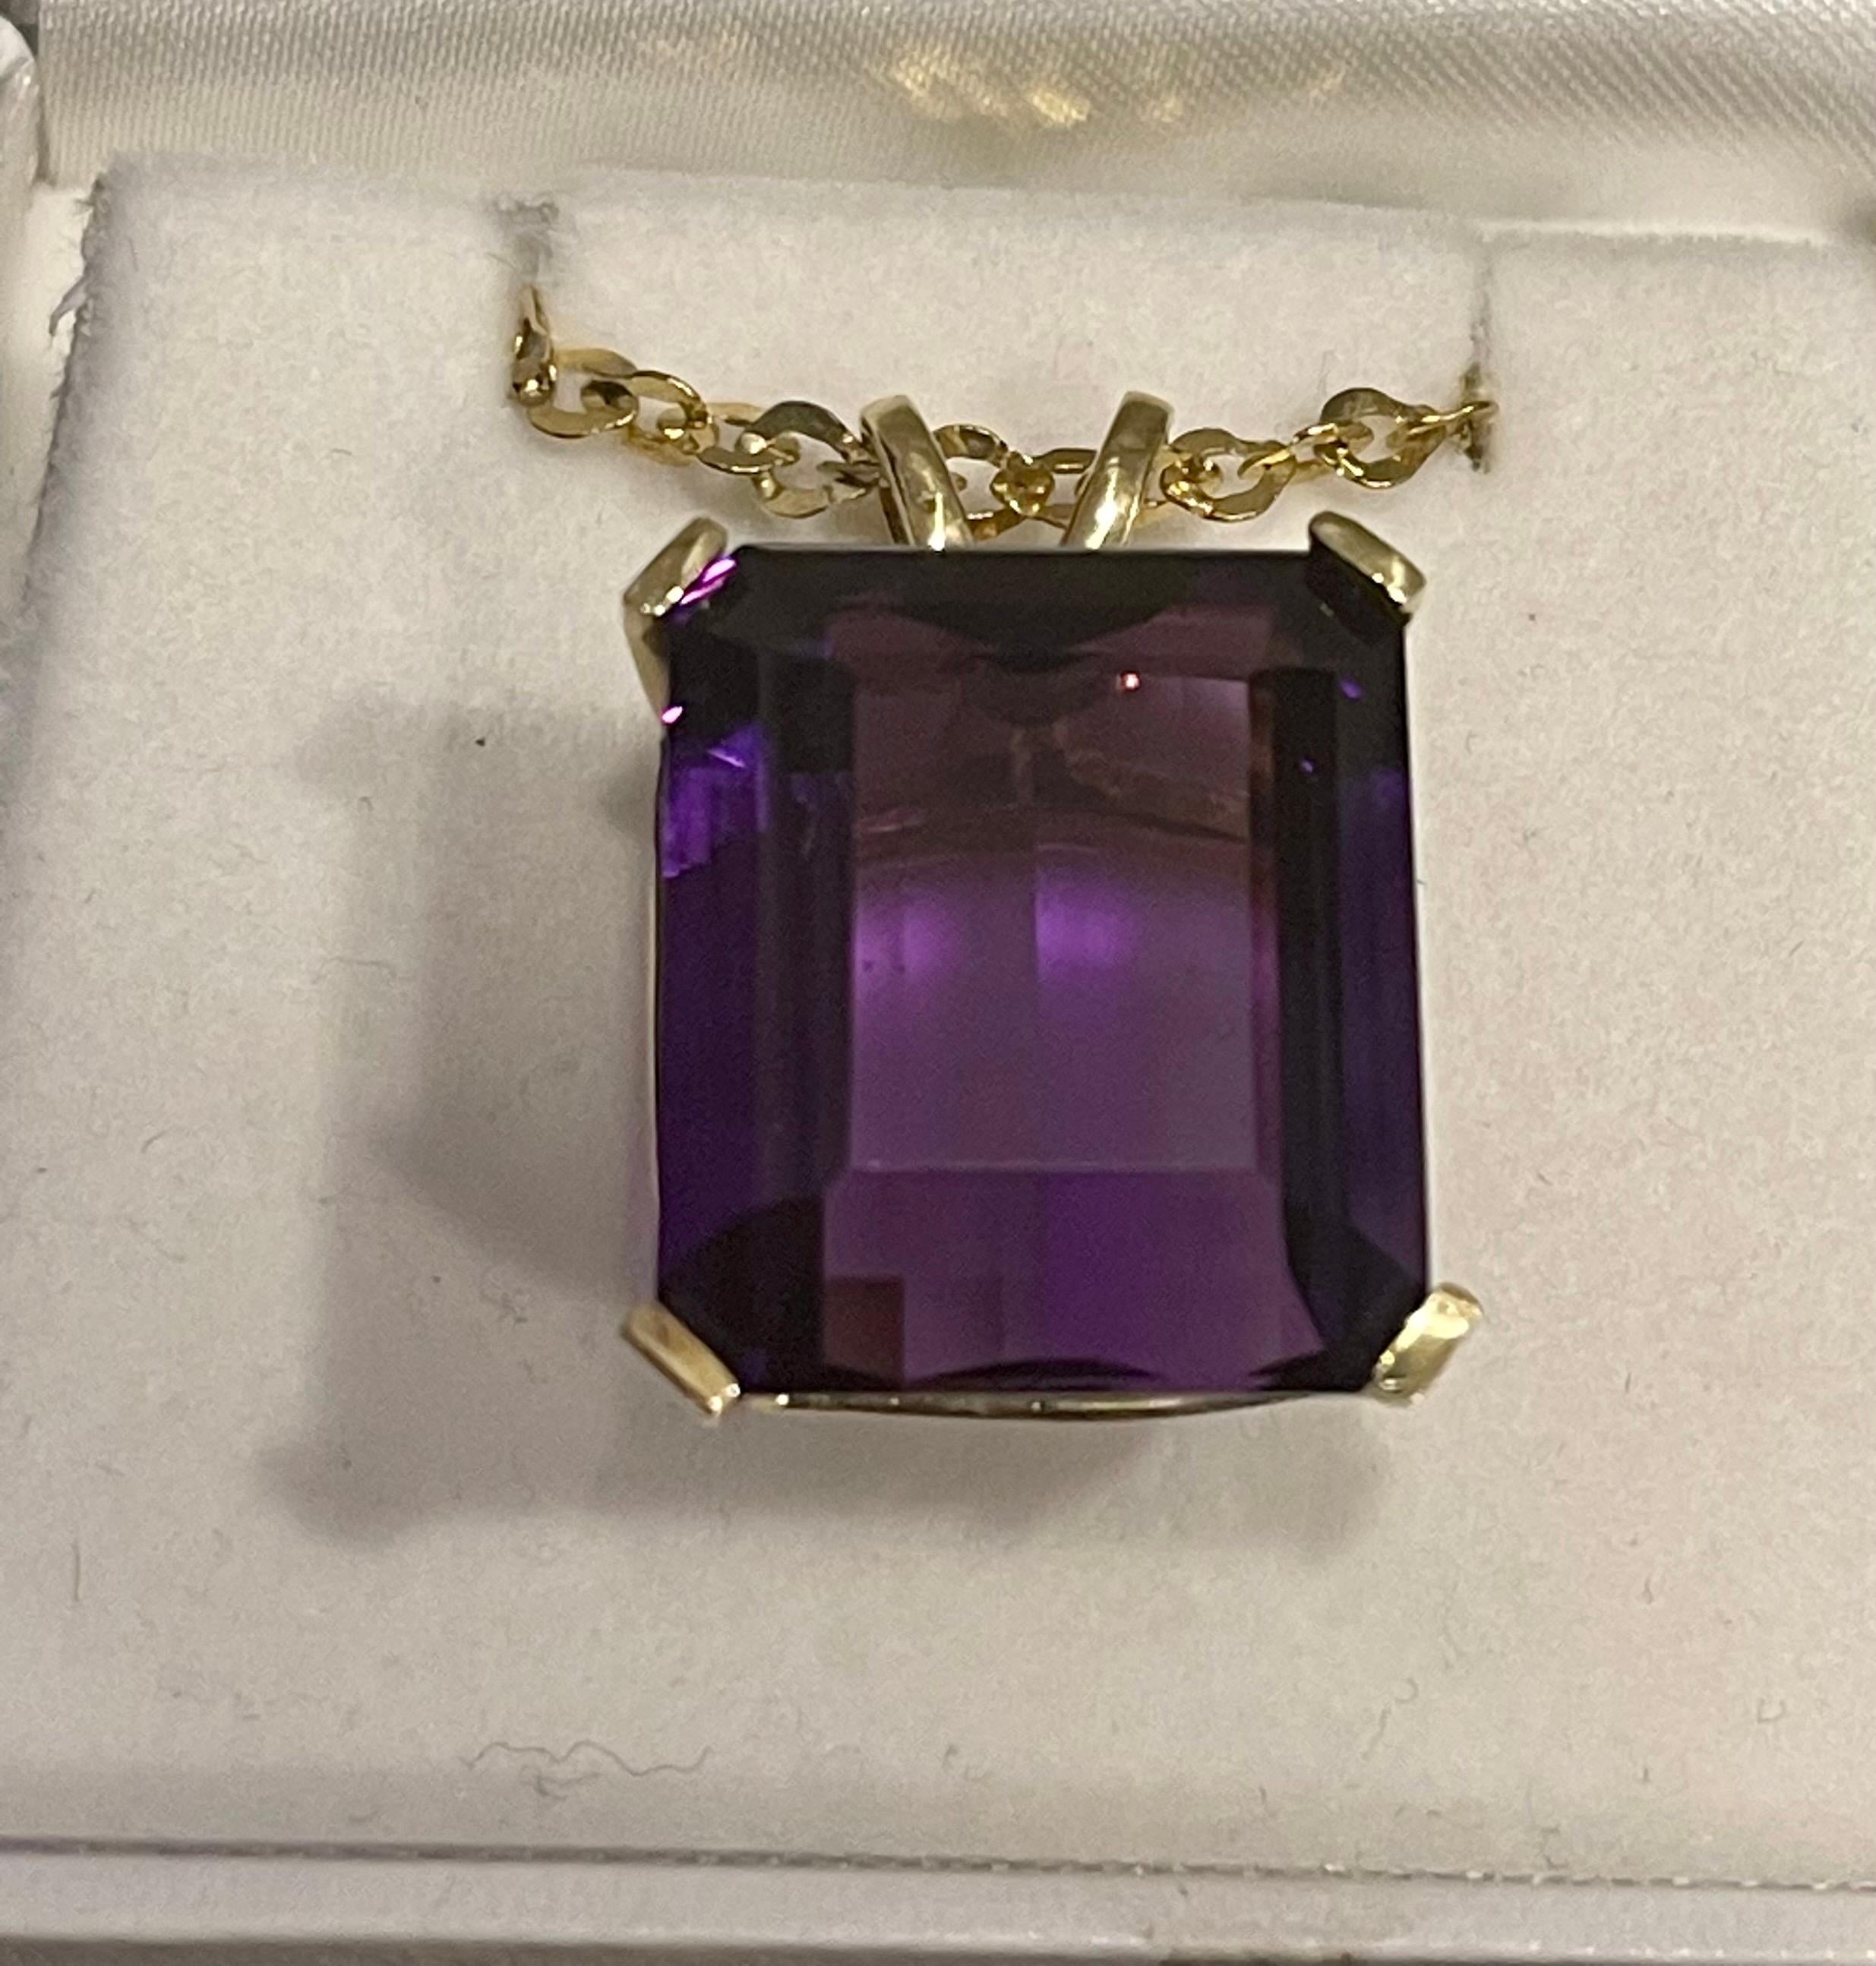 42 Ct Emerald Cut Amethyst Pendant /Necklace + 14 Kt Yellow Gold Chain Vintage 2